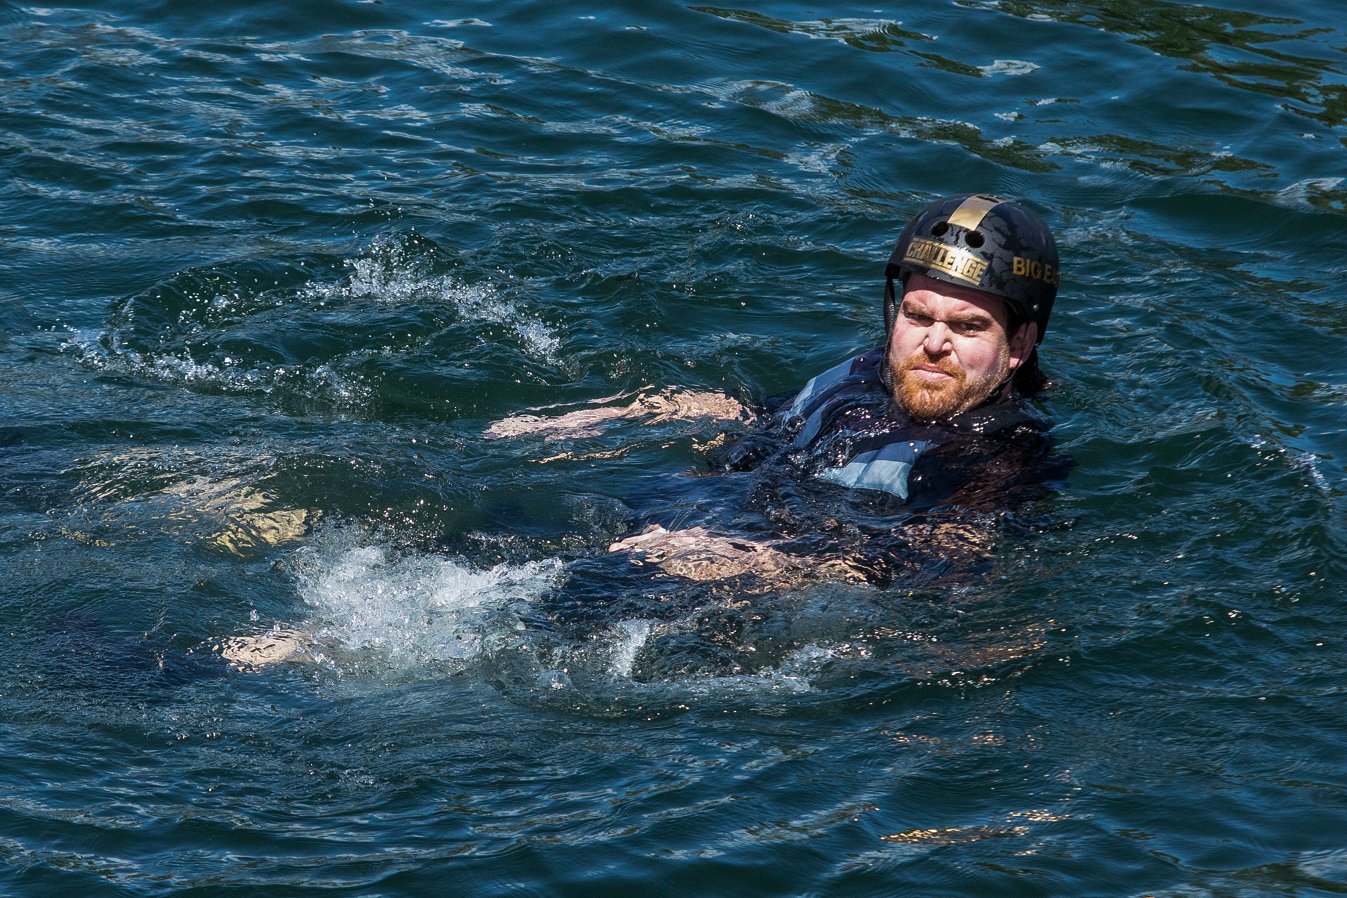 Eric 'Big Easy' Banks in the water during 'The Challenge: All Stars'